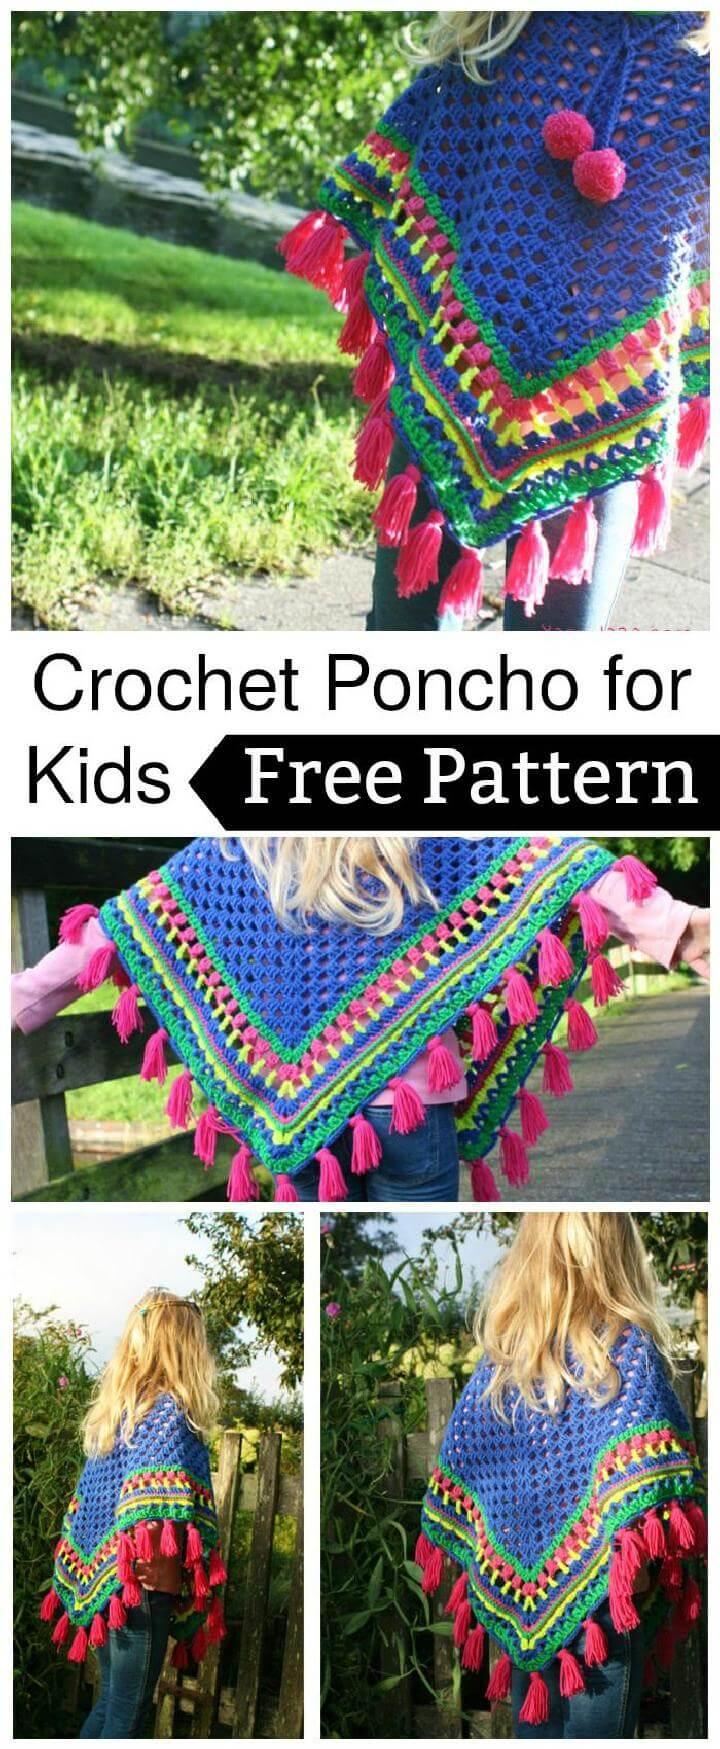 Free Crochet Childs Poncho Pattern 20 Free Crochet Summer Poncho Patterns For Womens Diy Crafts